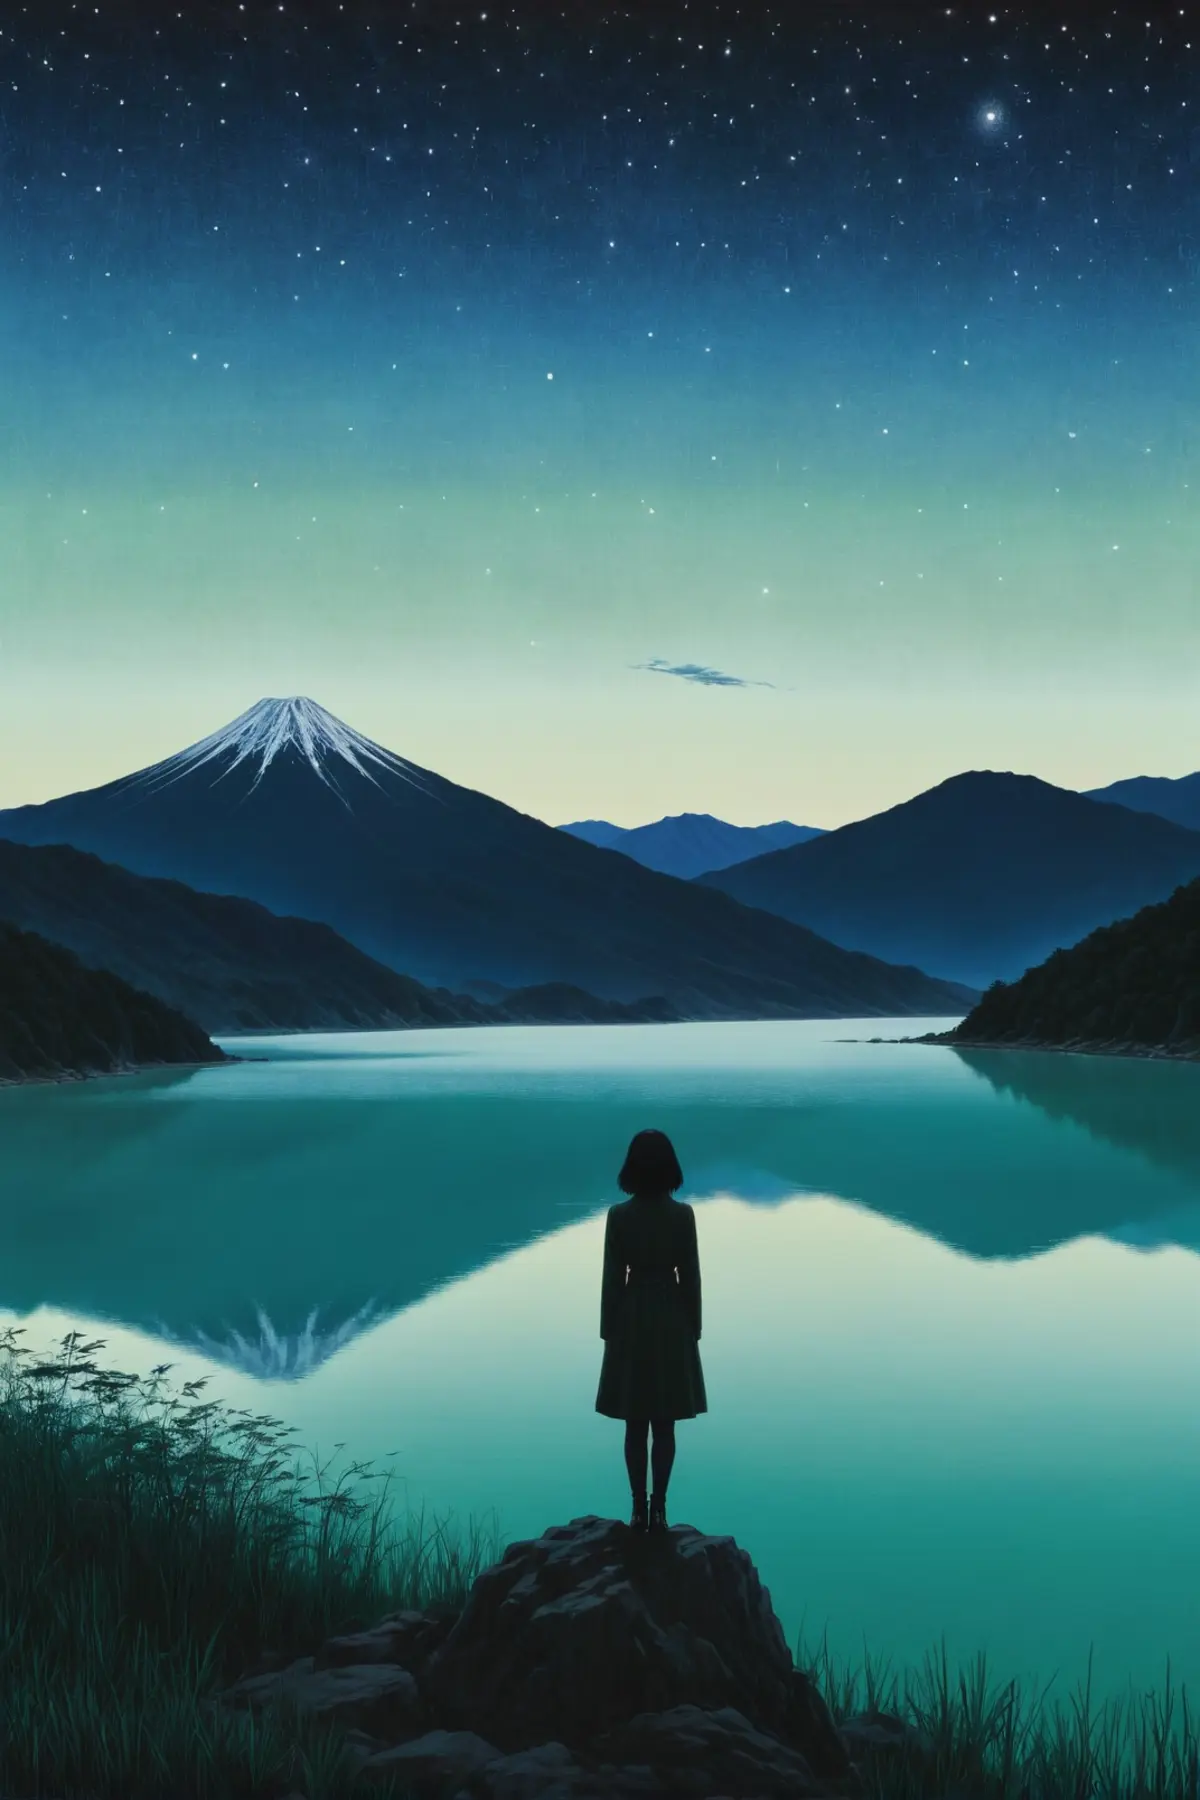 A woman standing on a rocky outcrop overlooking a tranquil lake at the base of a mountain under a starry sky at dawn.